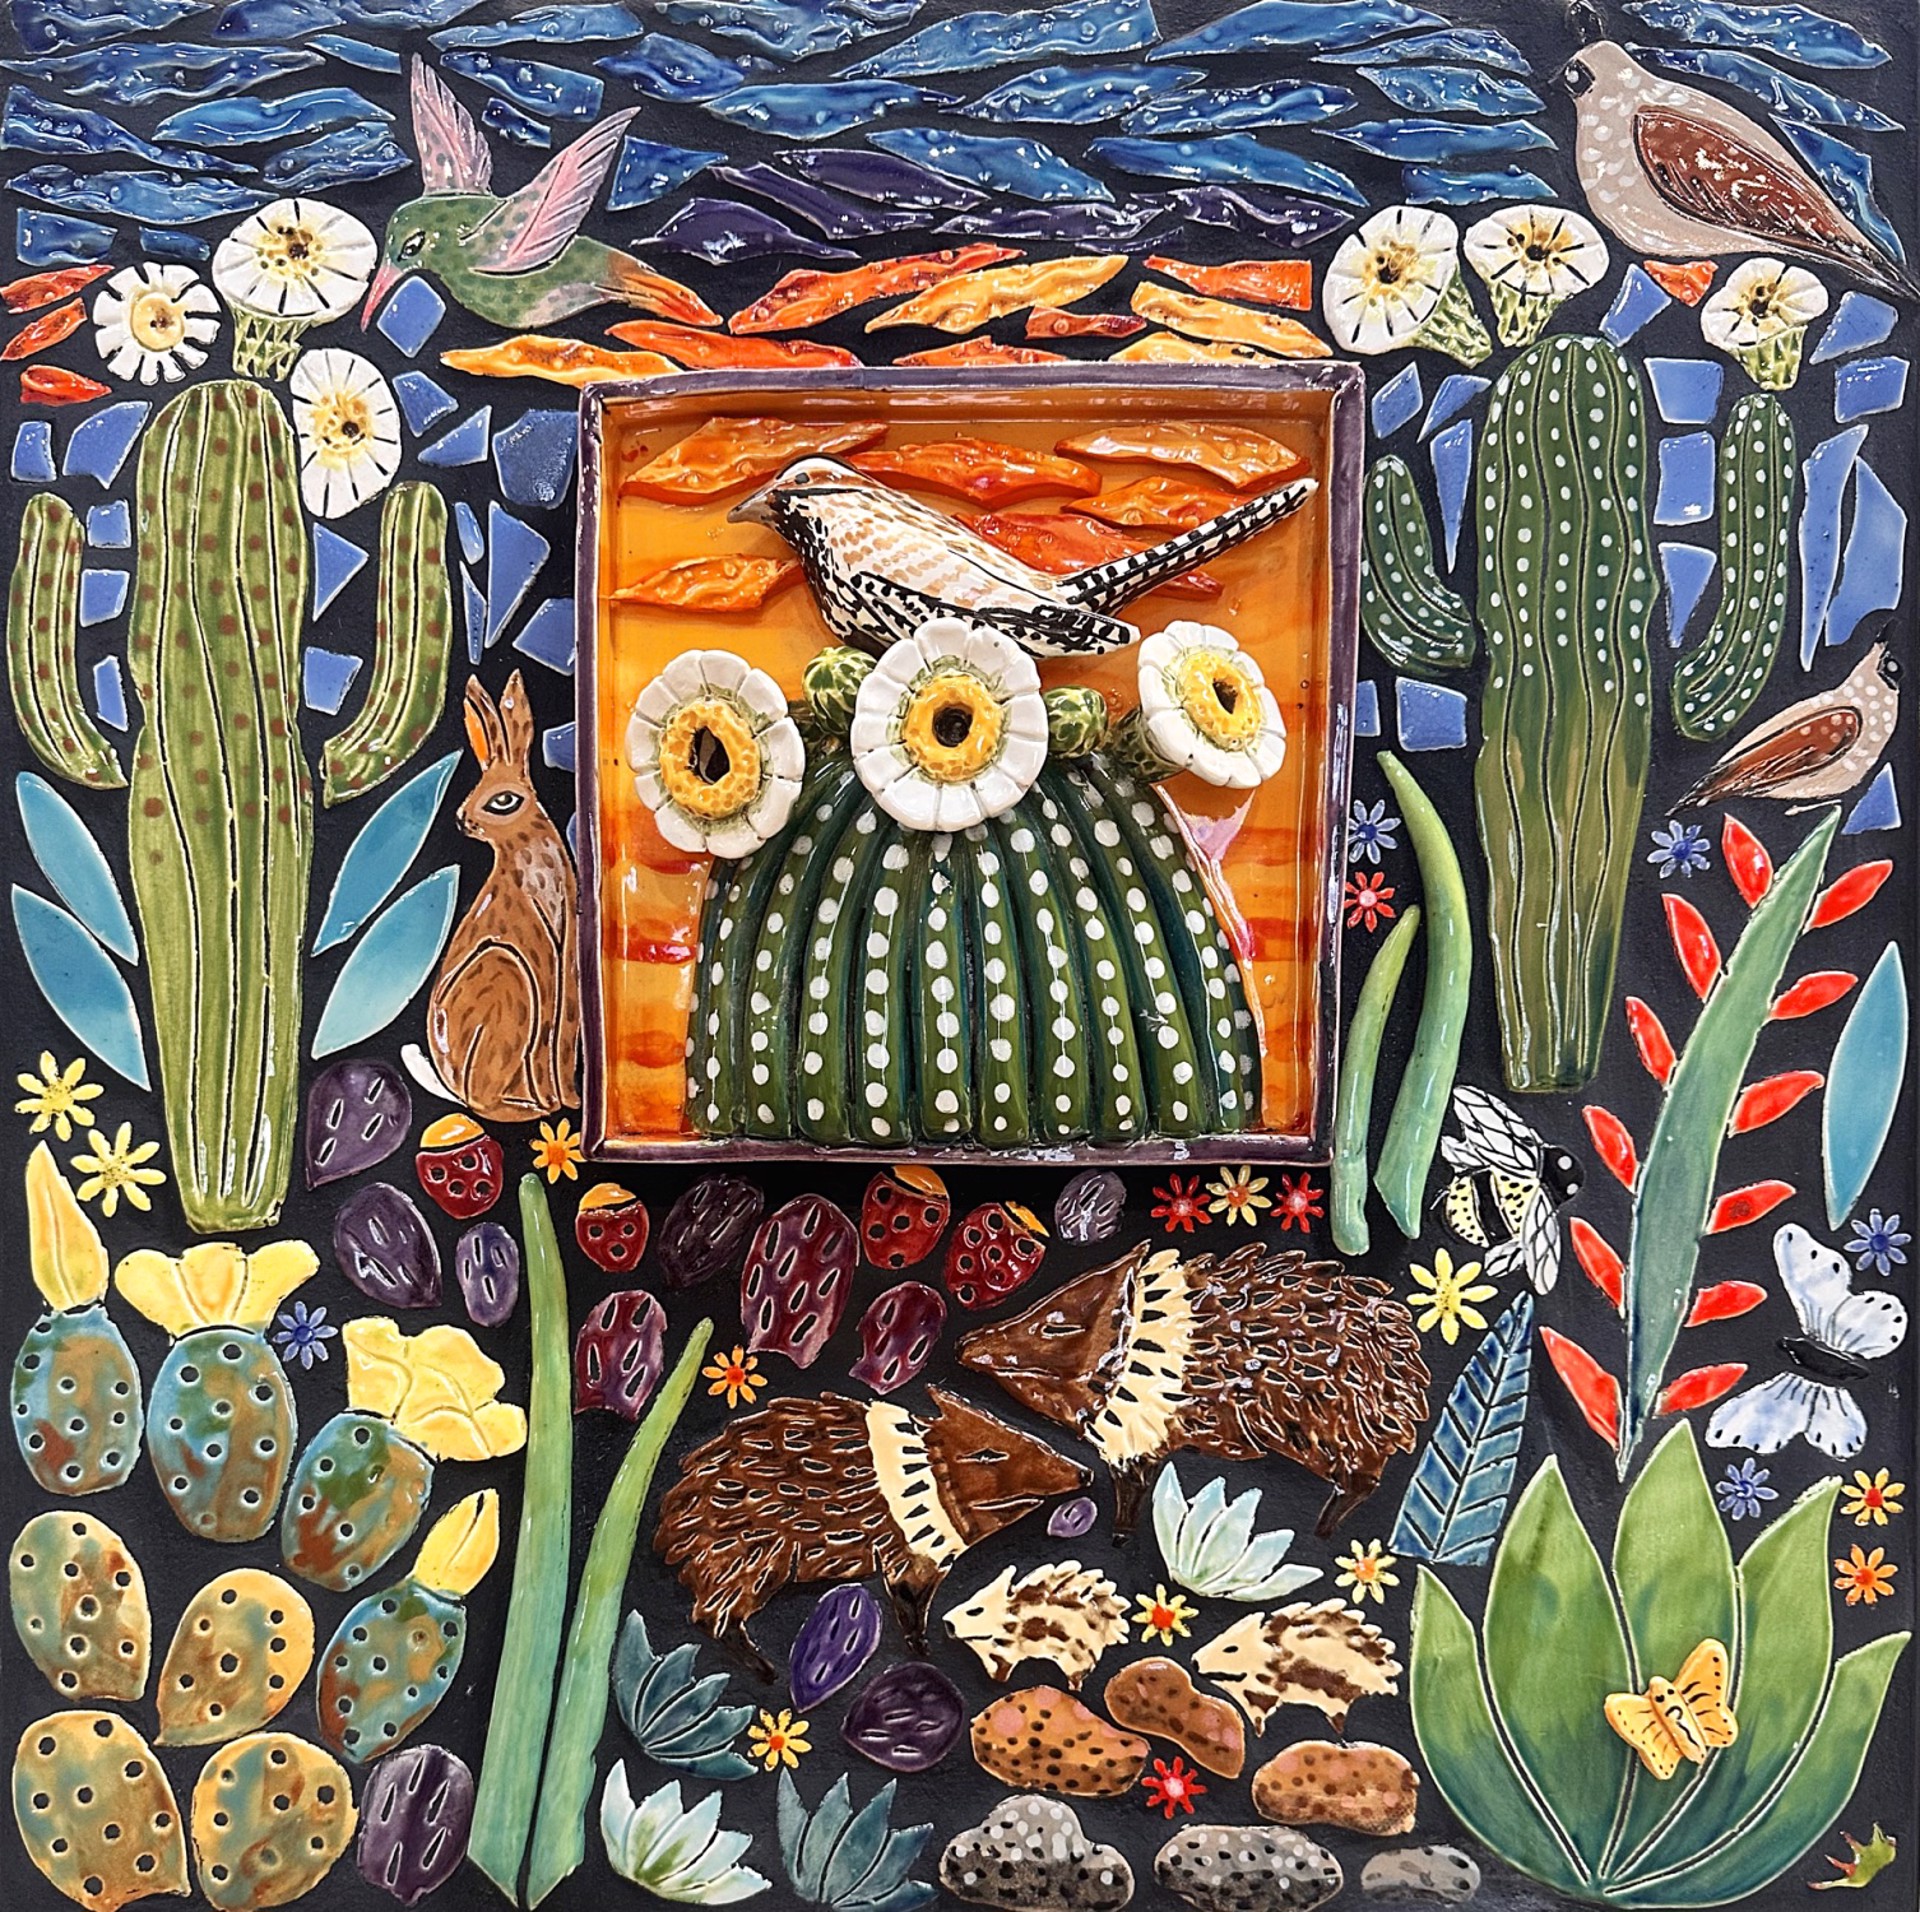 Cactus Wren Mosaic Mural by Robin Chlad